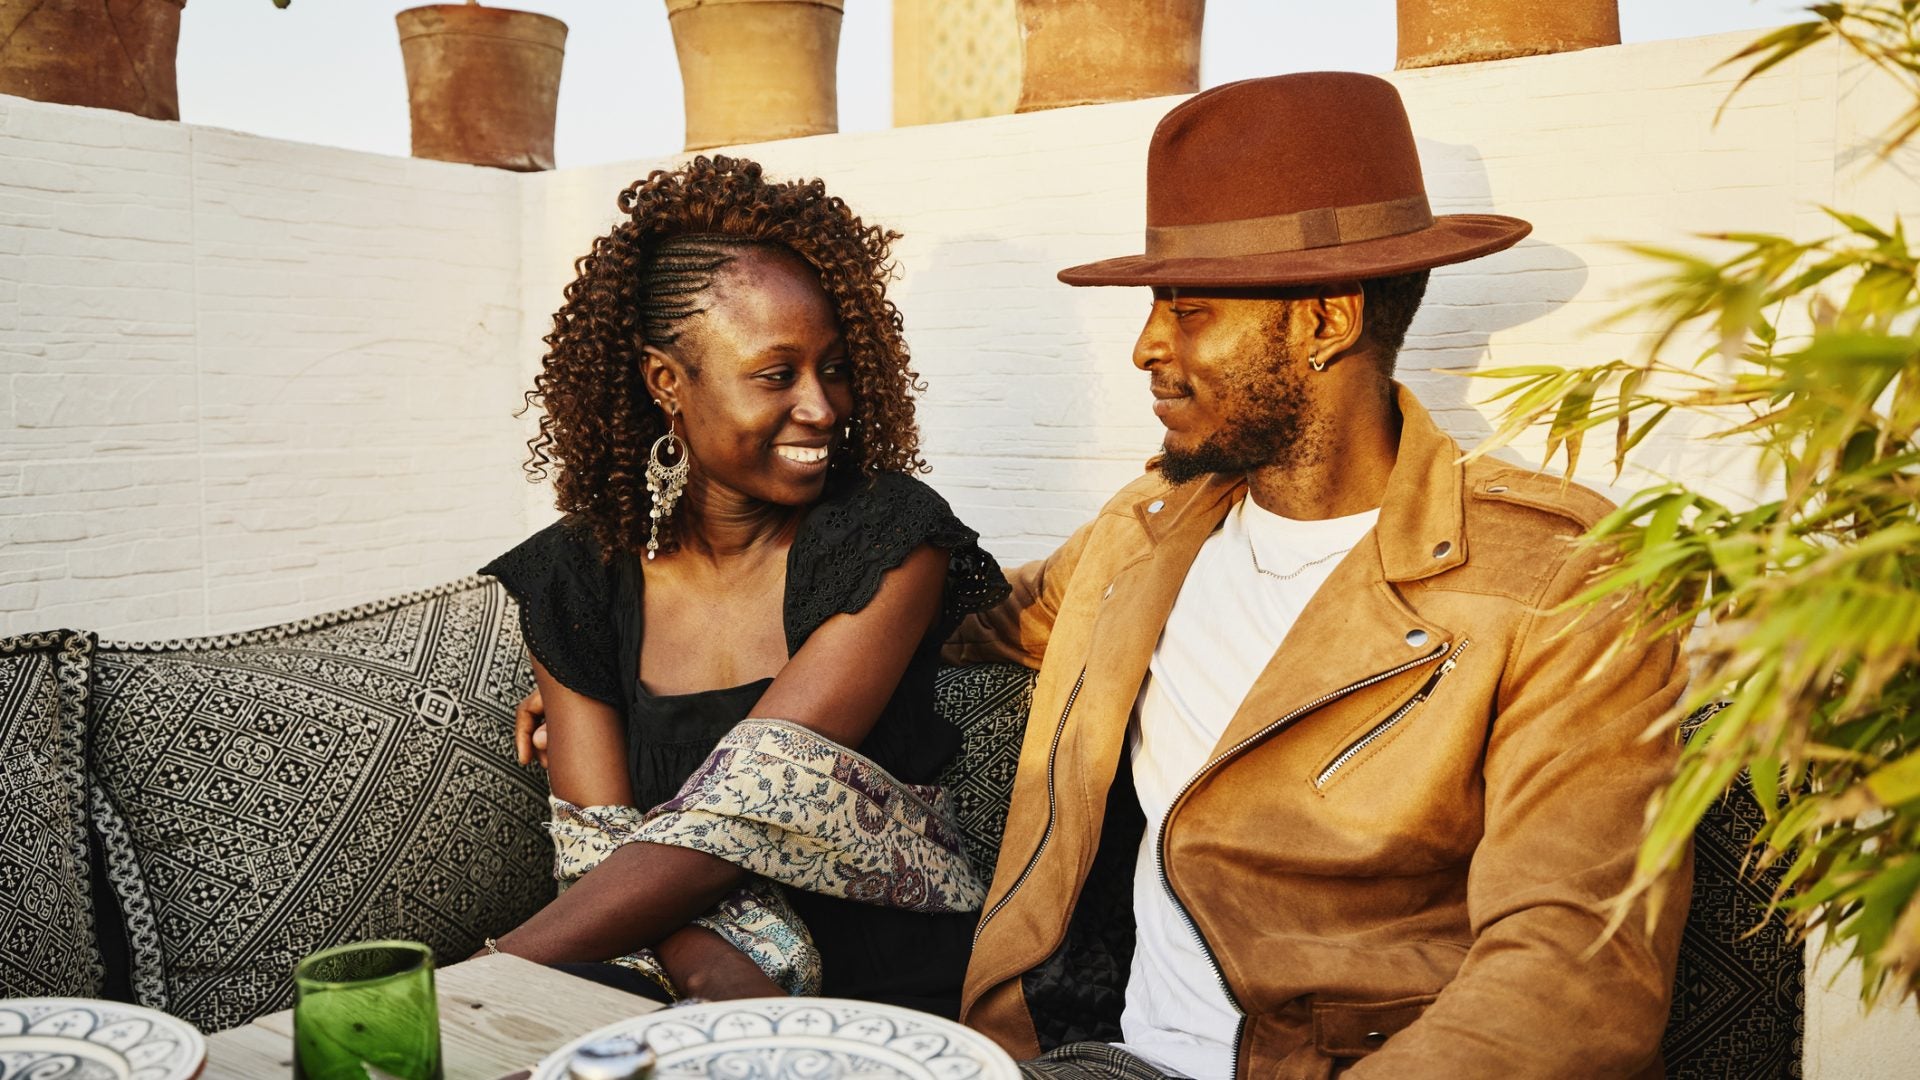 This Black Matchmaker Wants To Help You Heal, Then Get Boo’d Up